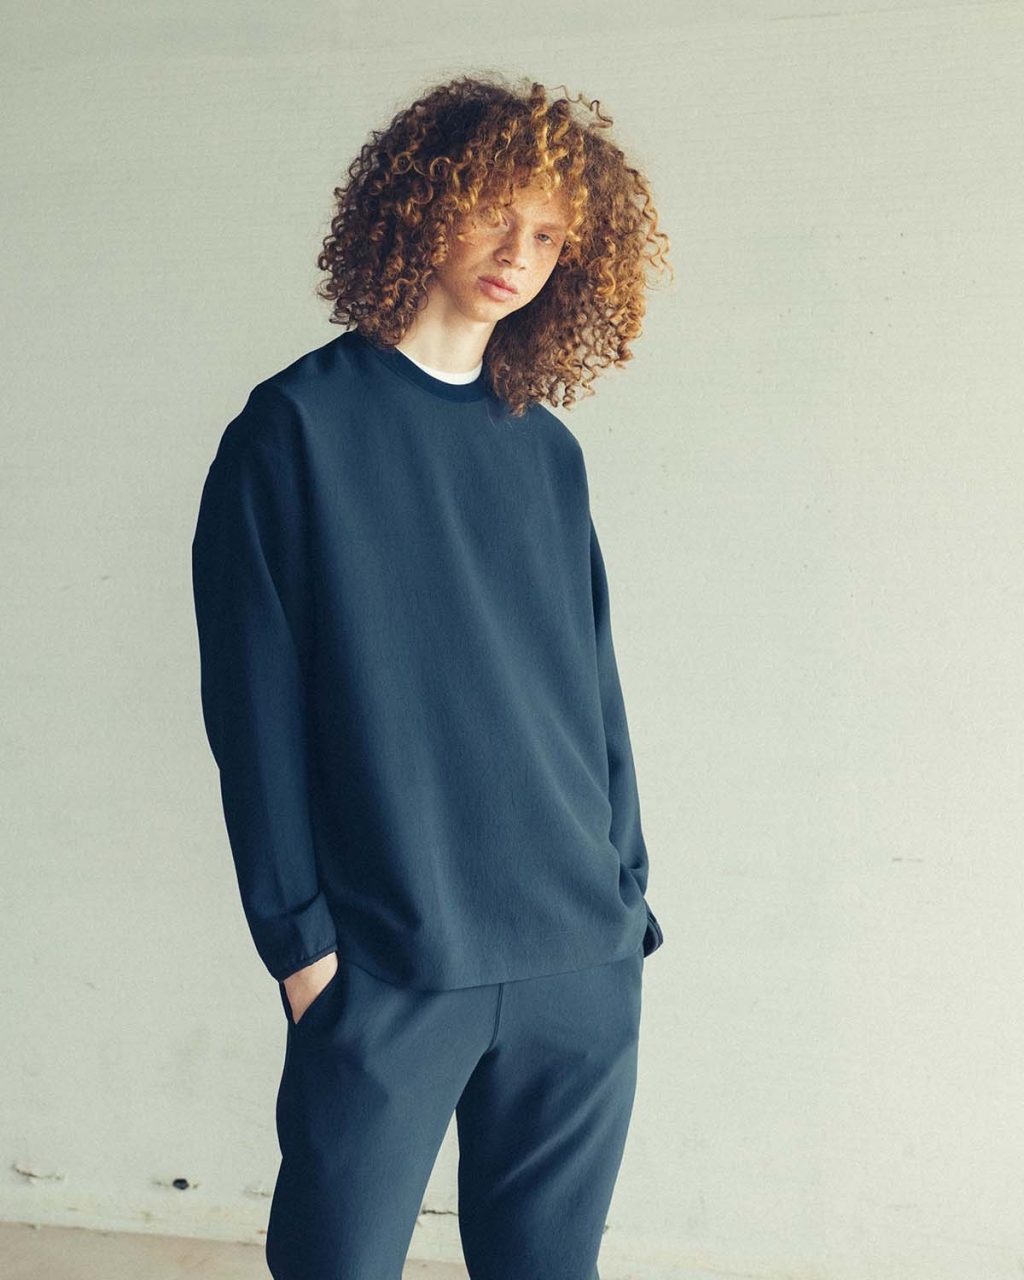 UNITED ARROWS & SONS and N. HOOLYWOODS's Daisuke Obana reveals its 